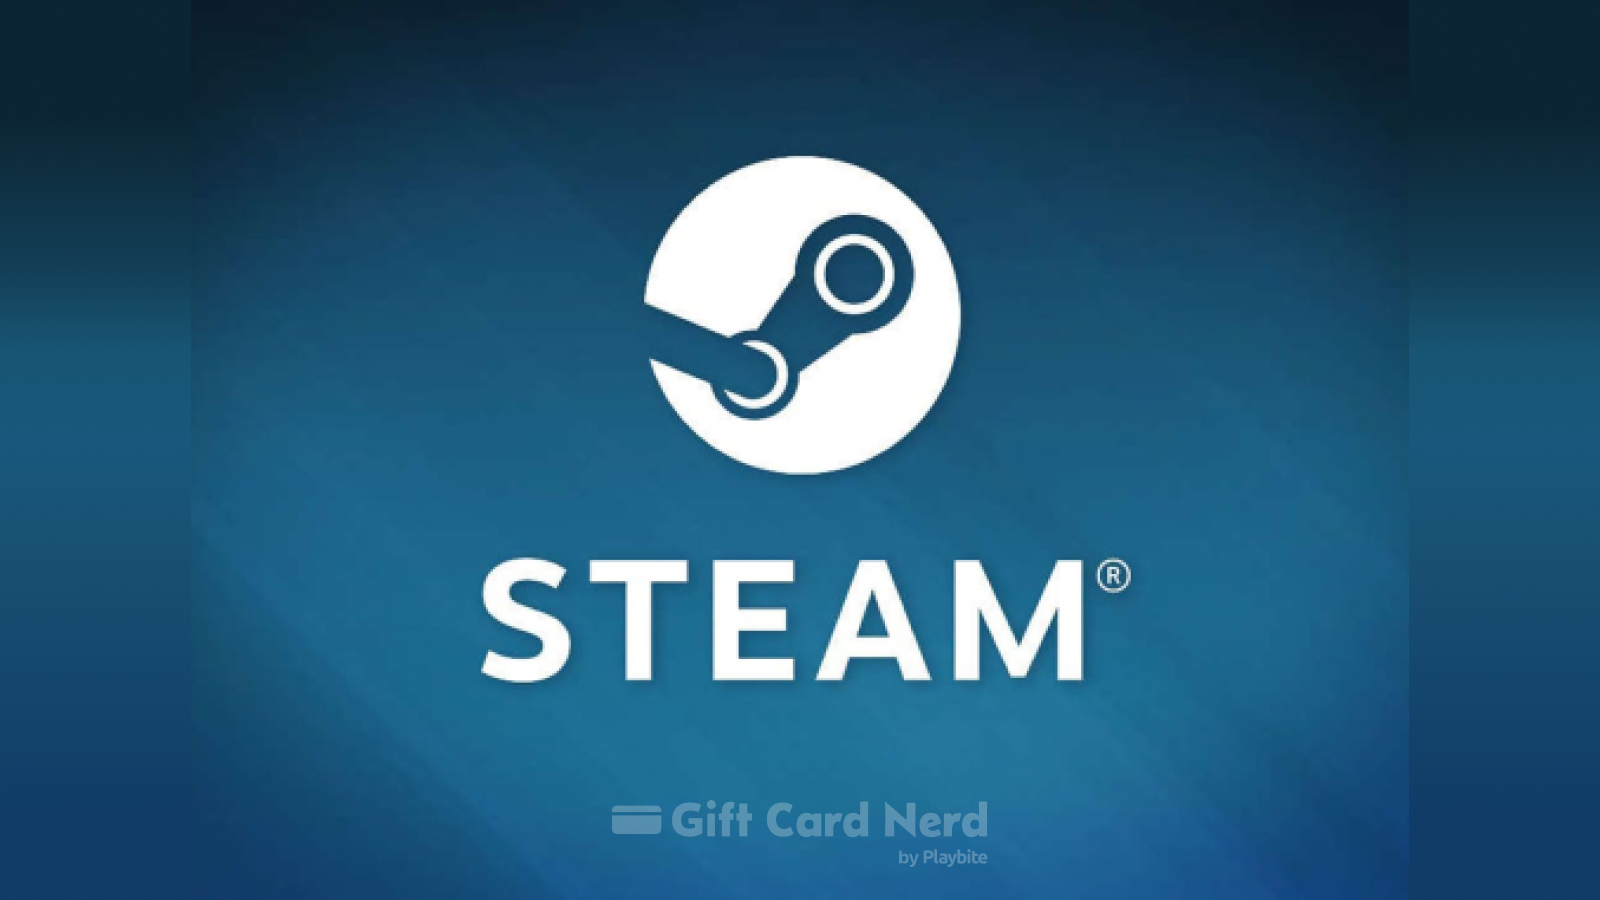 Does Game Stop Sell Steam Gift Cards?